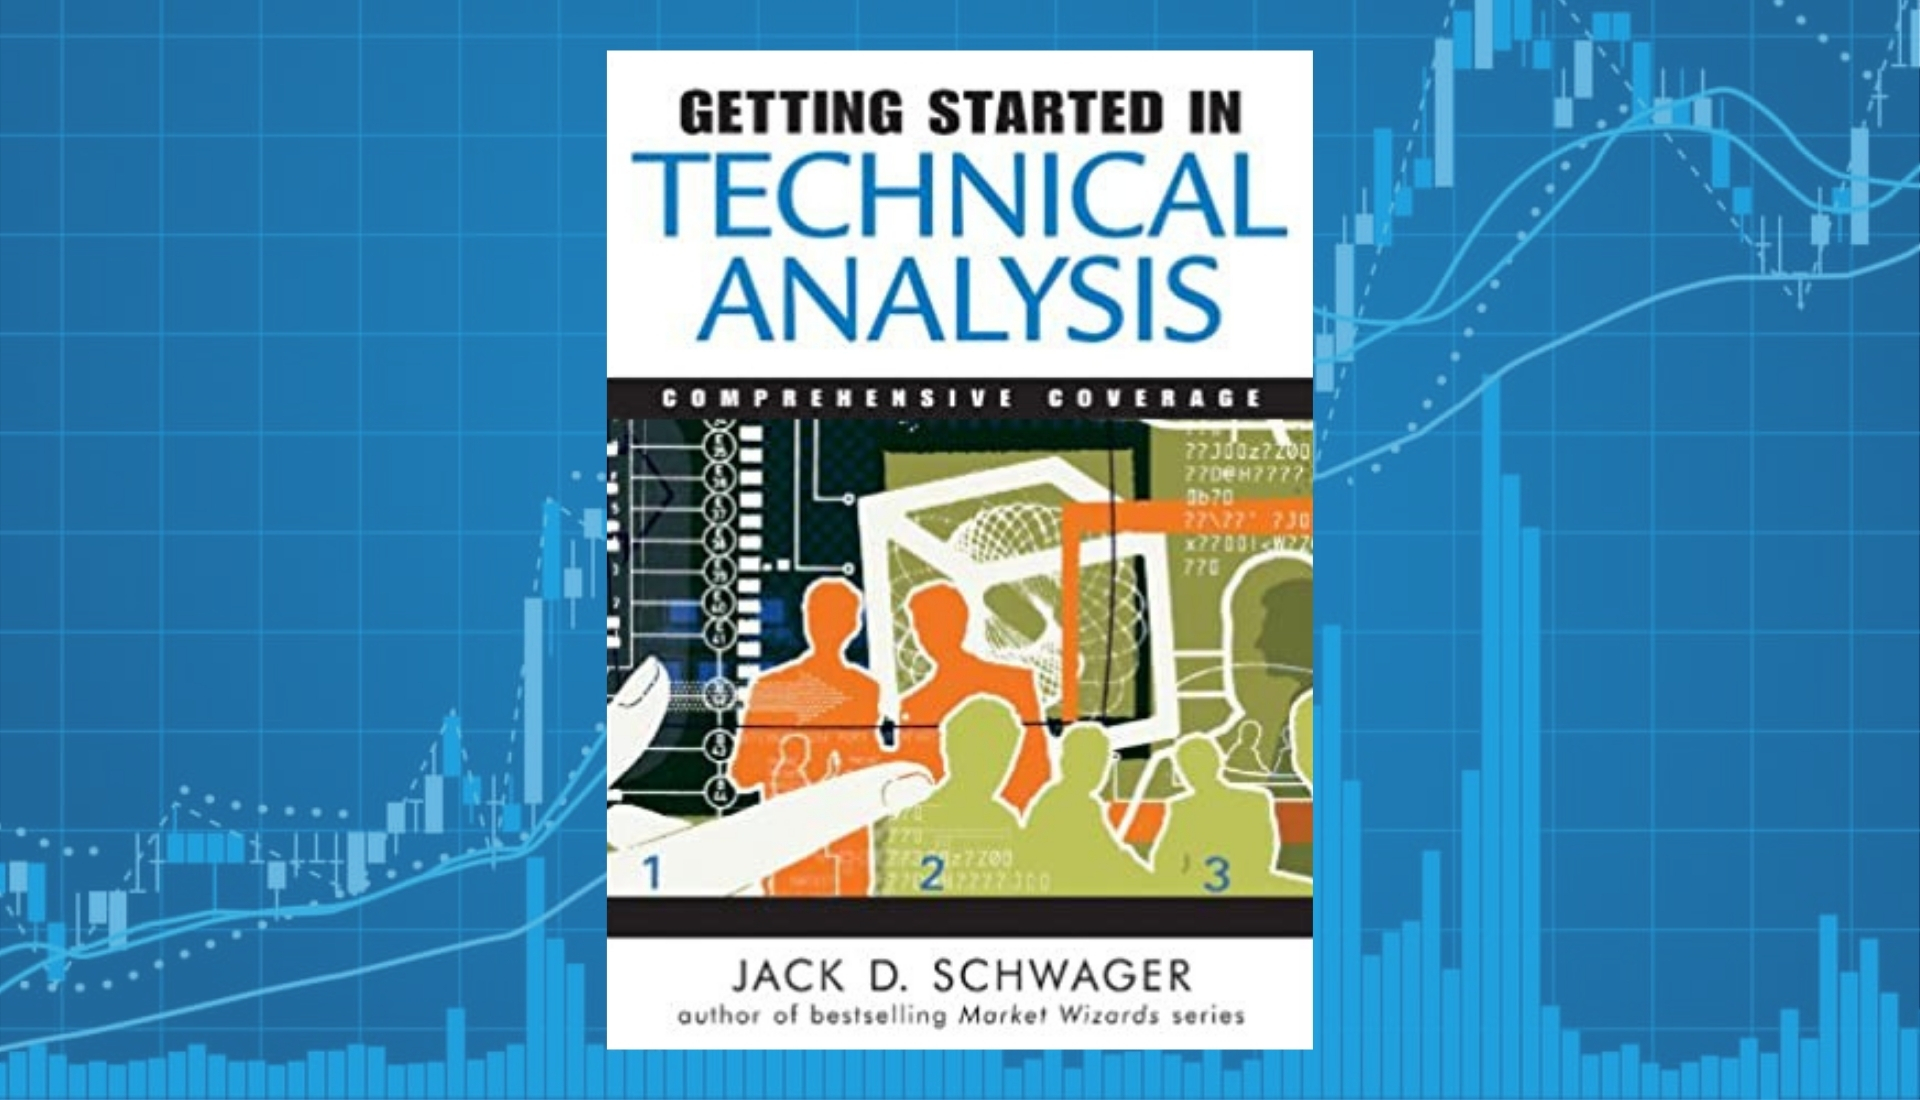 Review: “Getting Started in Technical Analysis 1st Edition” By Jack D. Schwager